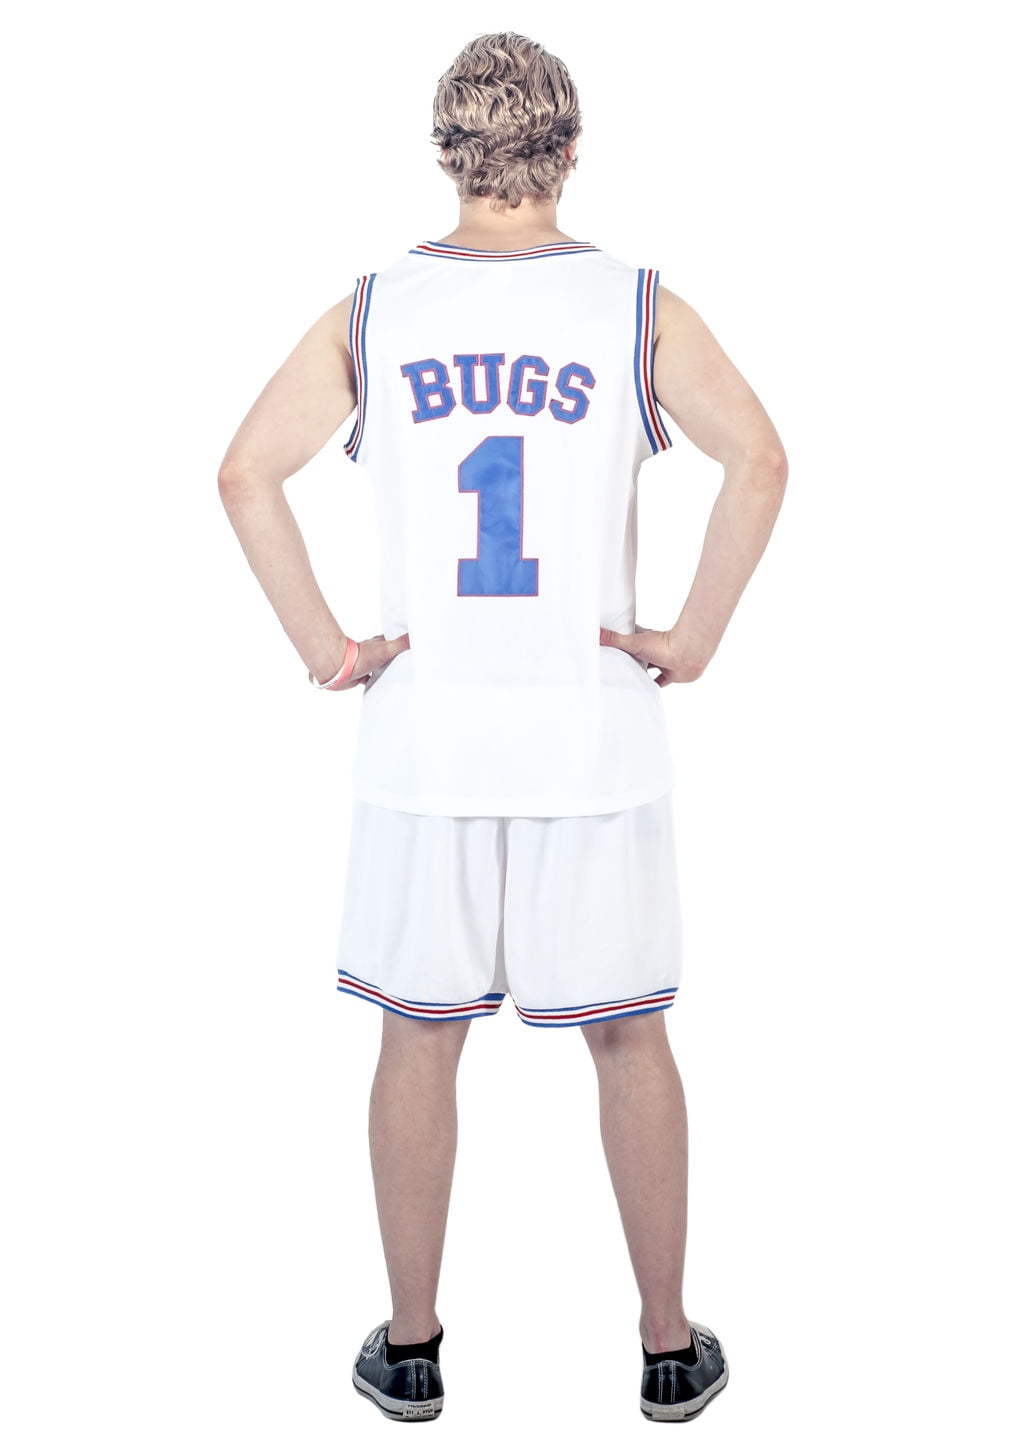 Youth Basketball Jersey Bugs #1 LOLA #10 Bunny Space Movie Jerseys Kids Basketball Shirt for Party White/Black 